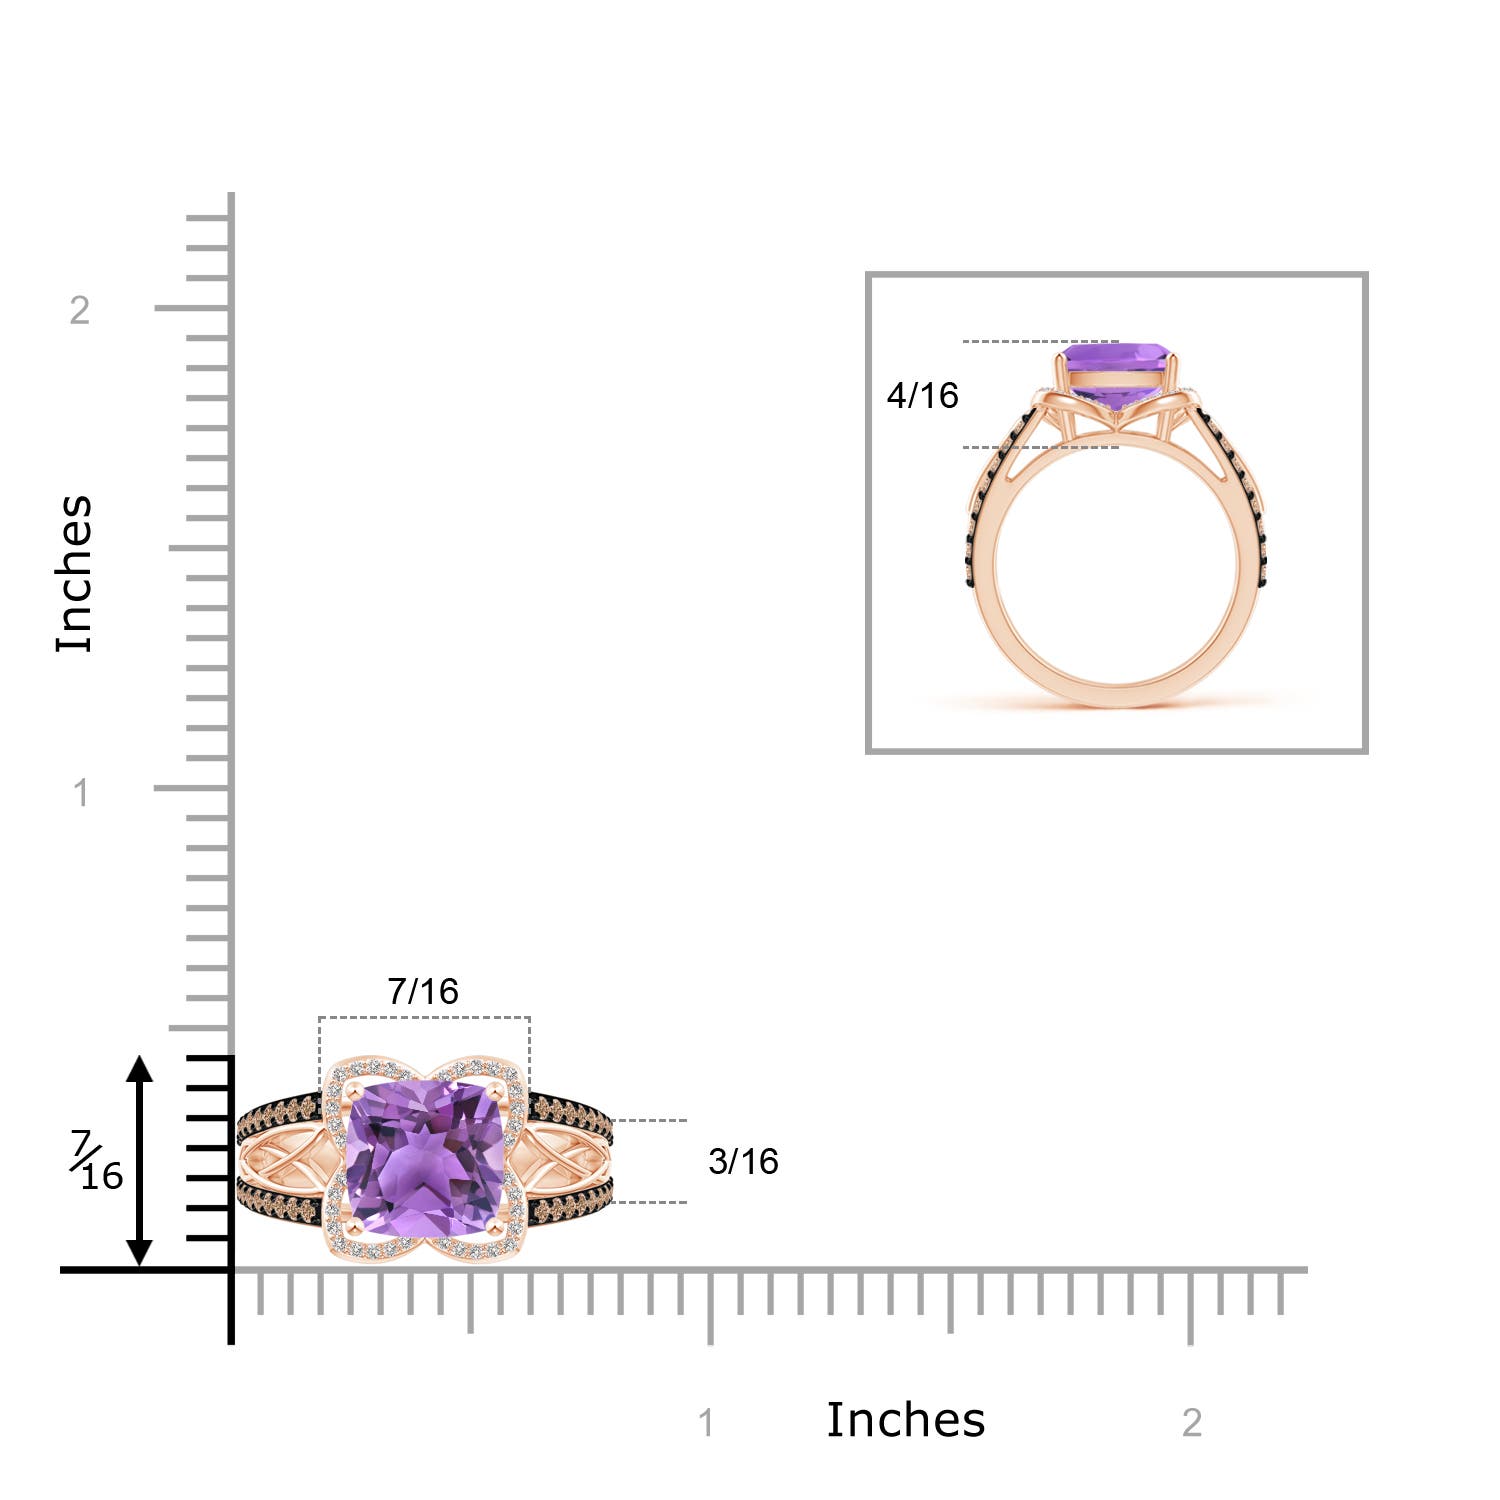 AA - Amethyst / 2.6 CT / 14 KT Rose Gold